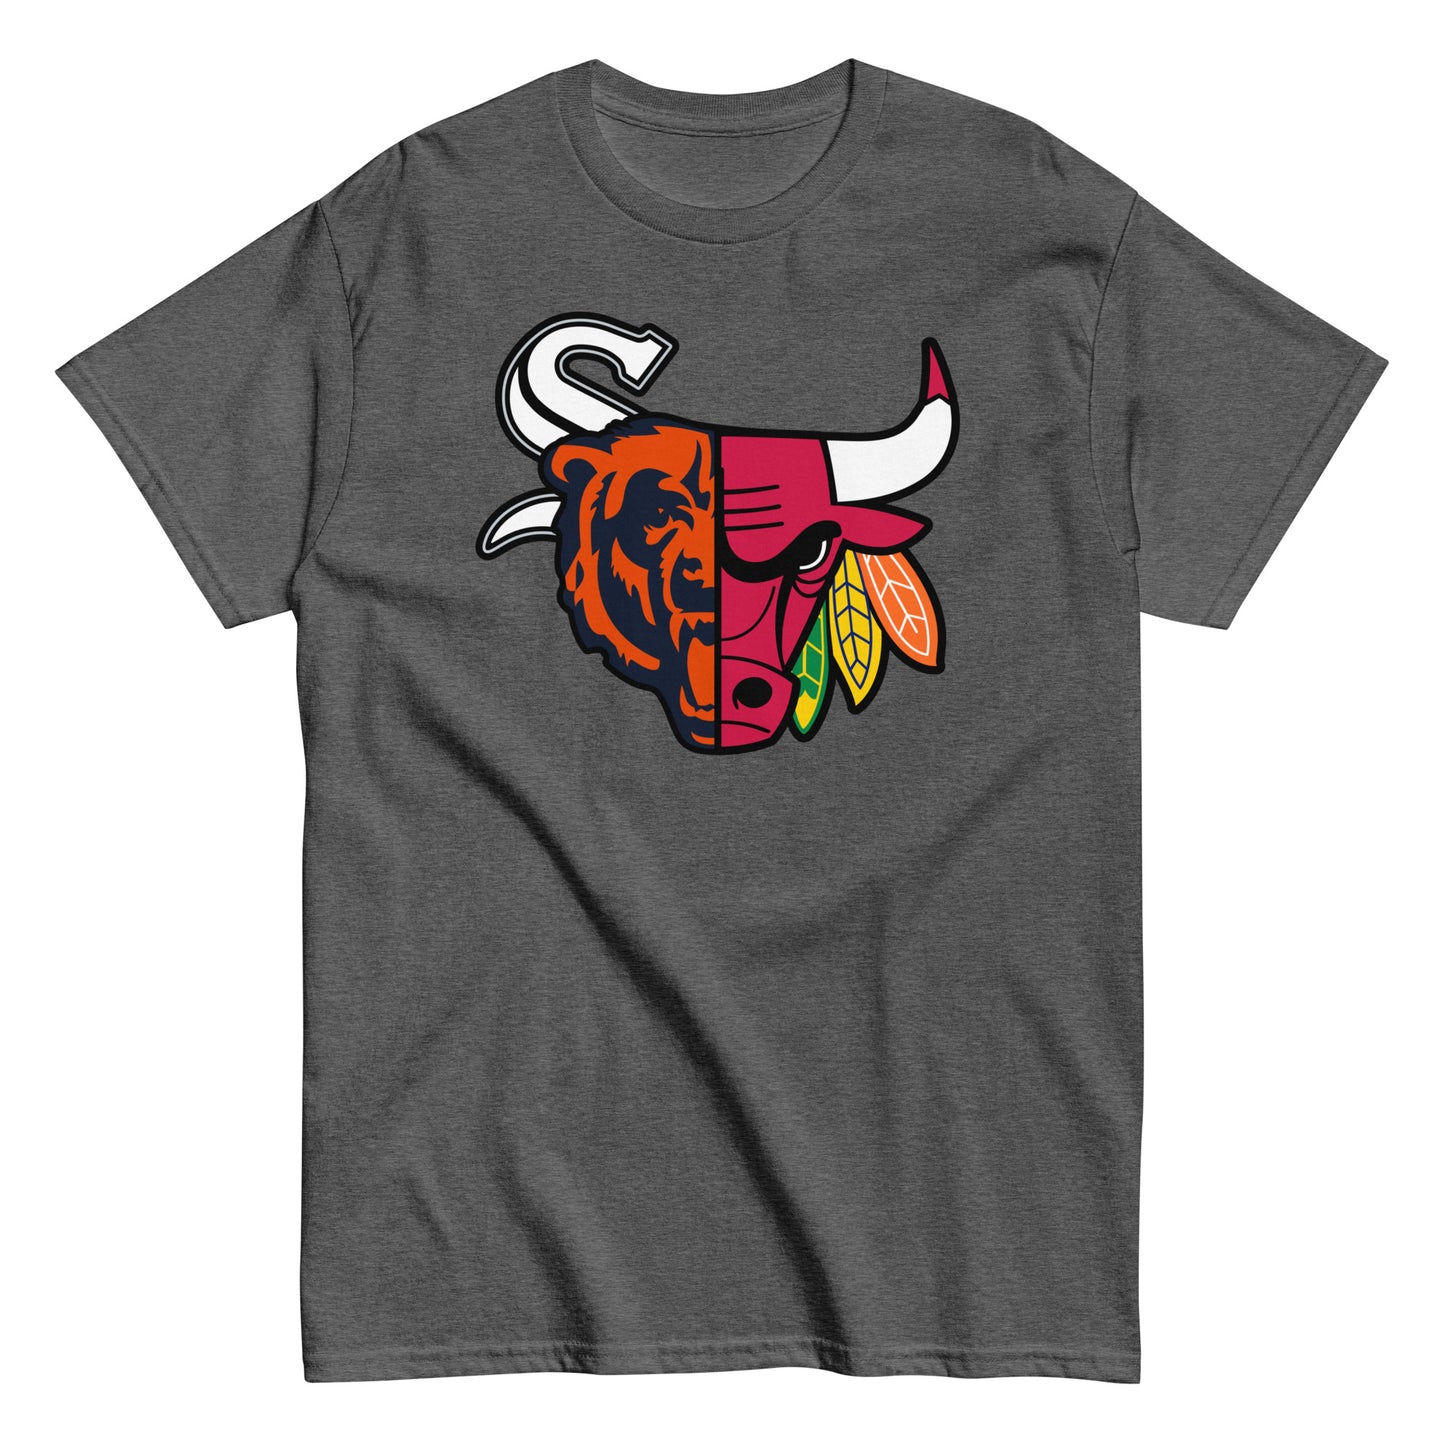 CHI (Sox) Tee - Full Color